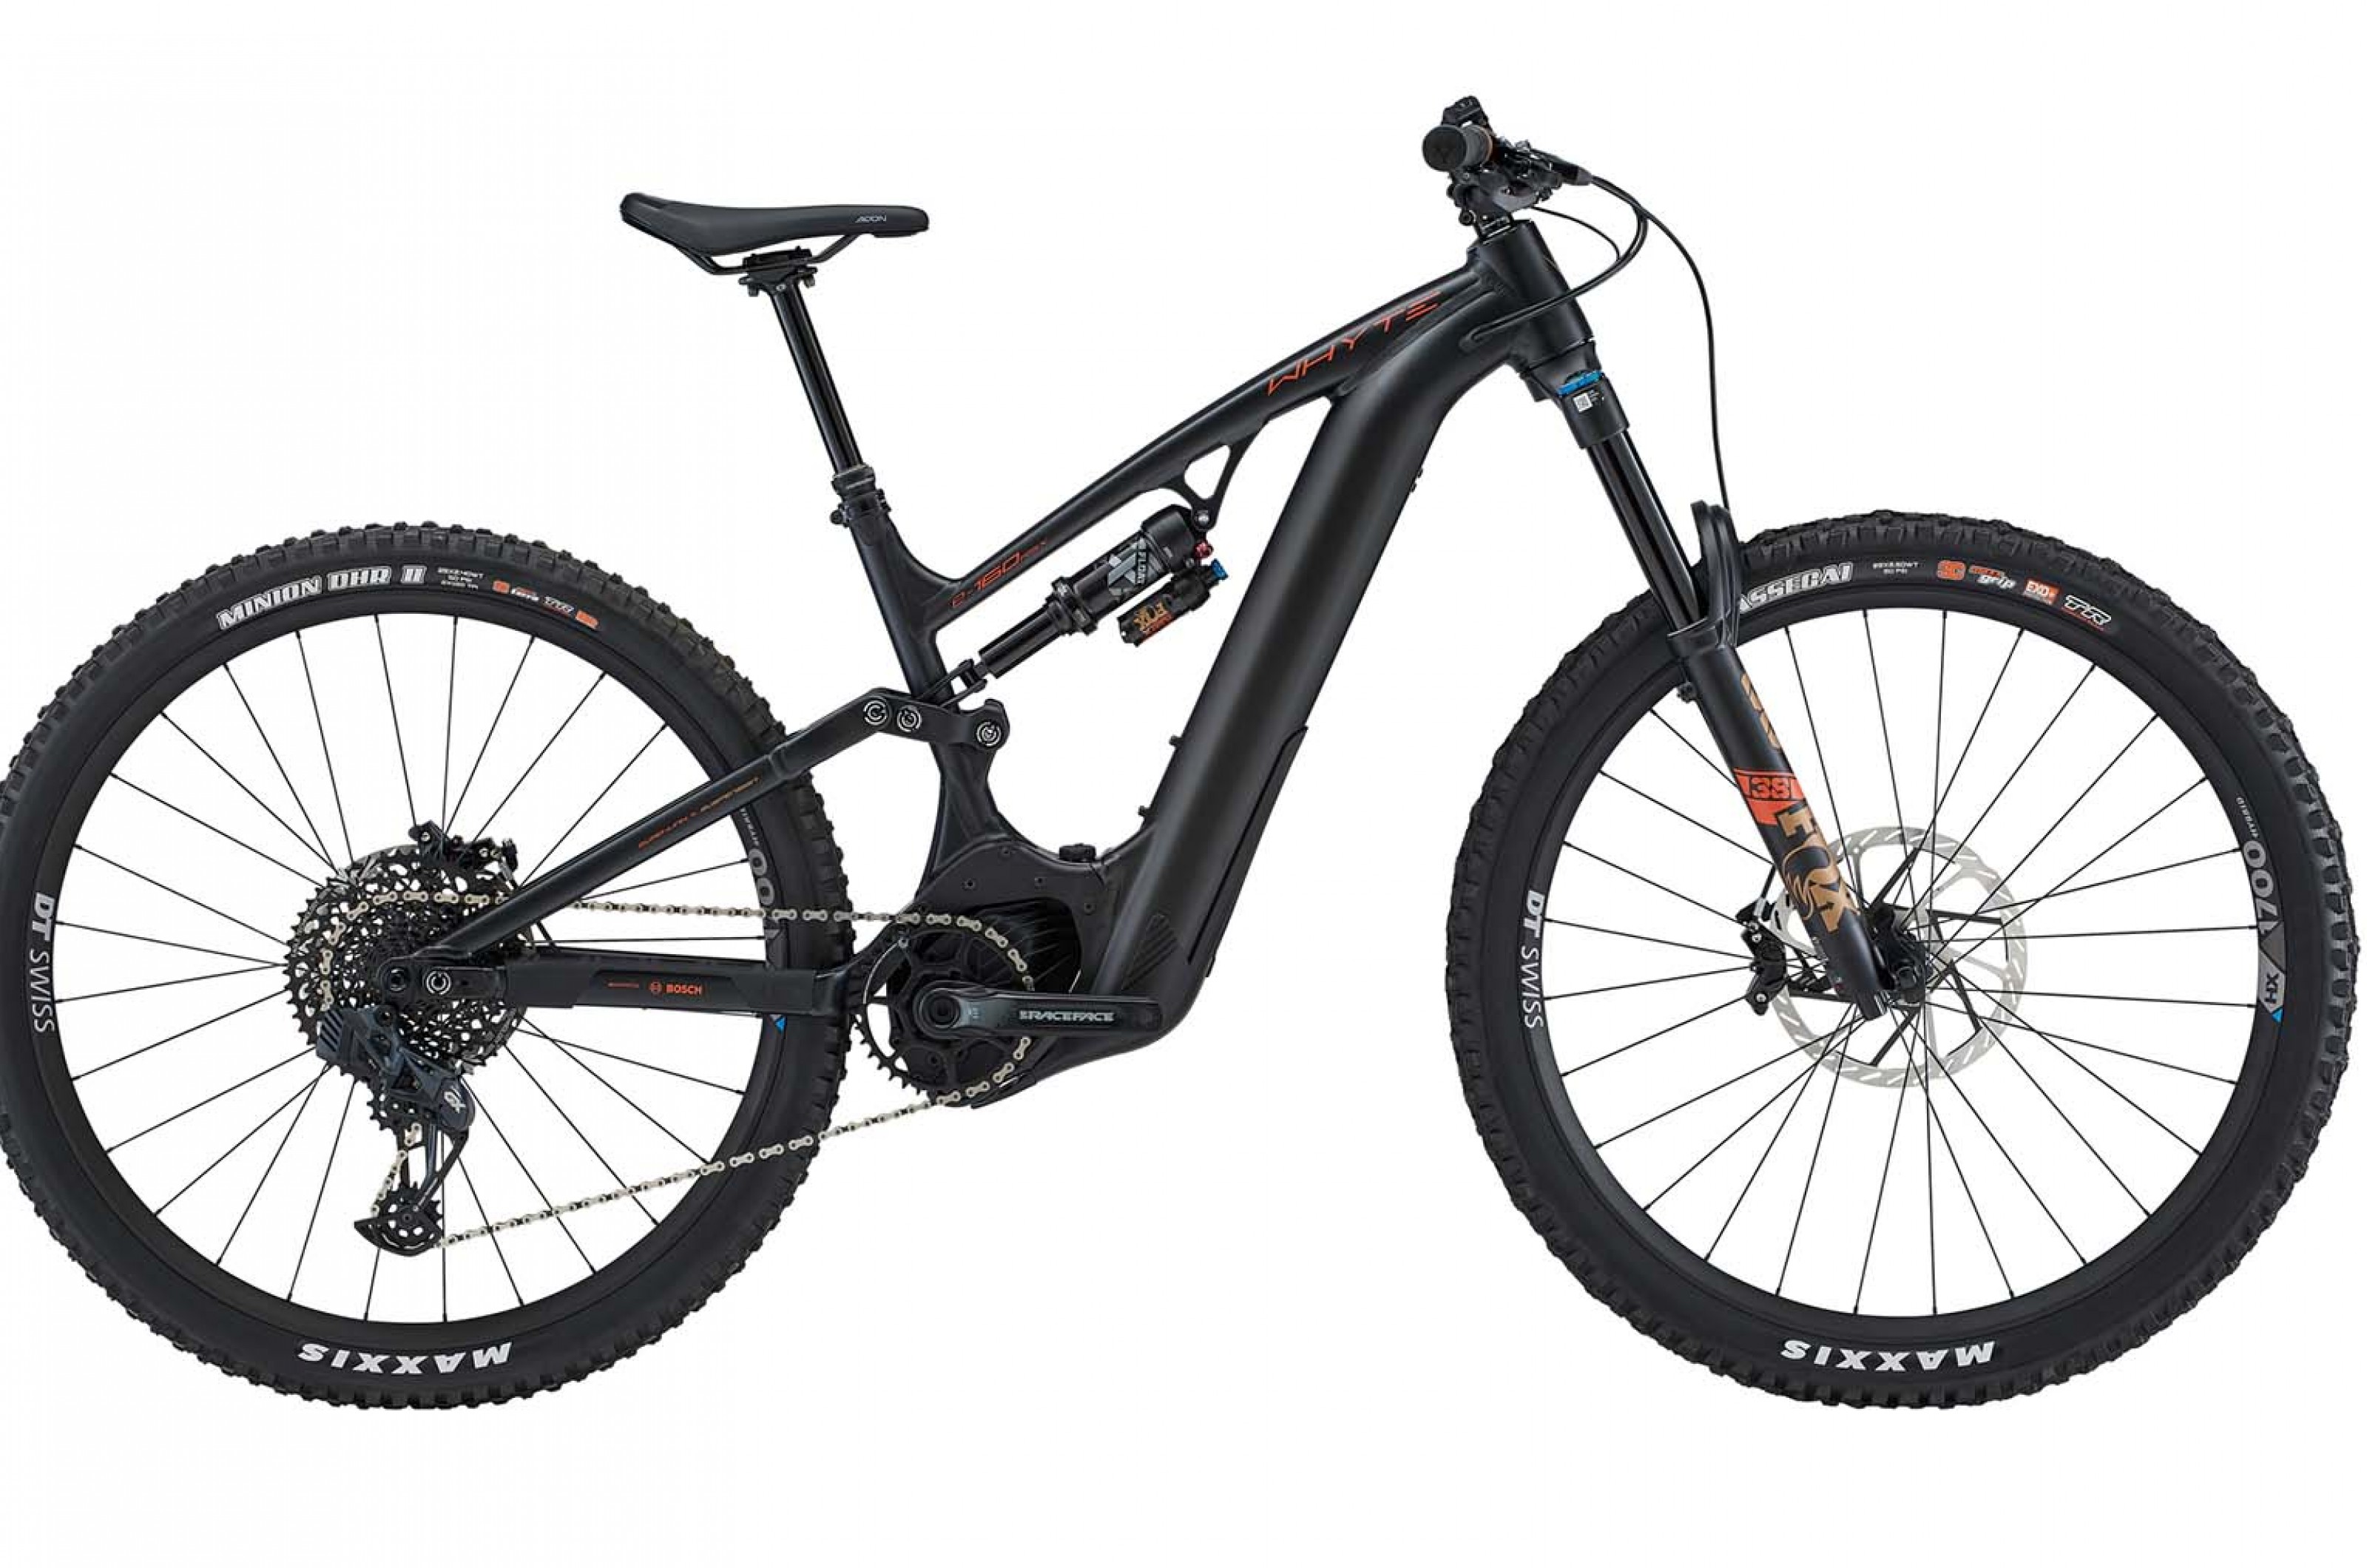 <p>We tried the Whyte E-160 RS last year and absolutely loved it. The RSX is the updated version with enduro inspired geometry thanks to Senior Design Engineer (and British Enduro Series Champion) Sam Shucksmith. It’s powered by Bosch’s latest Performance Line CX motor and 750Wh battery for plenty of range. </p>  <p>Whether you want something to shred at the local trail centre or for racing between the tape, the E-160 RSX is responsive, agile and superb fun. </p>